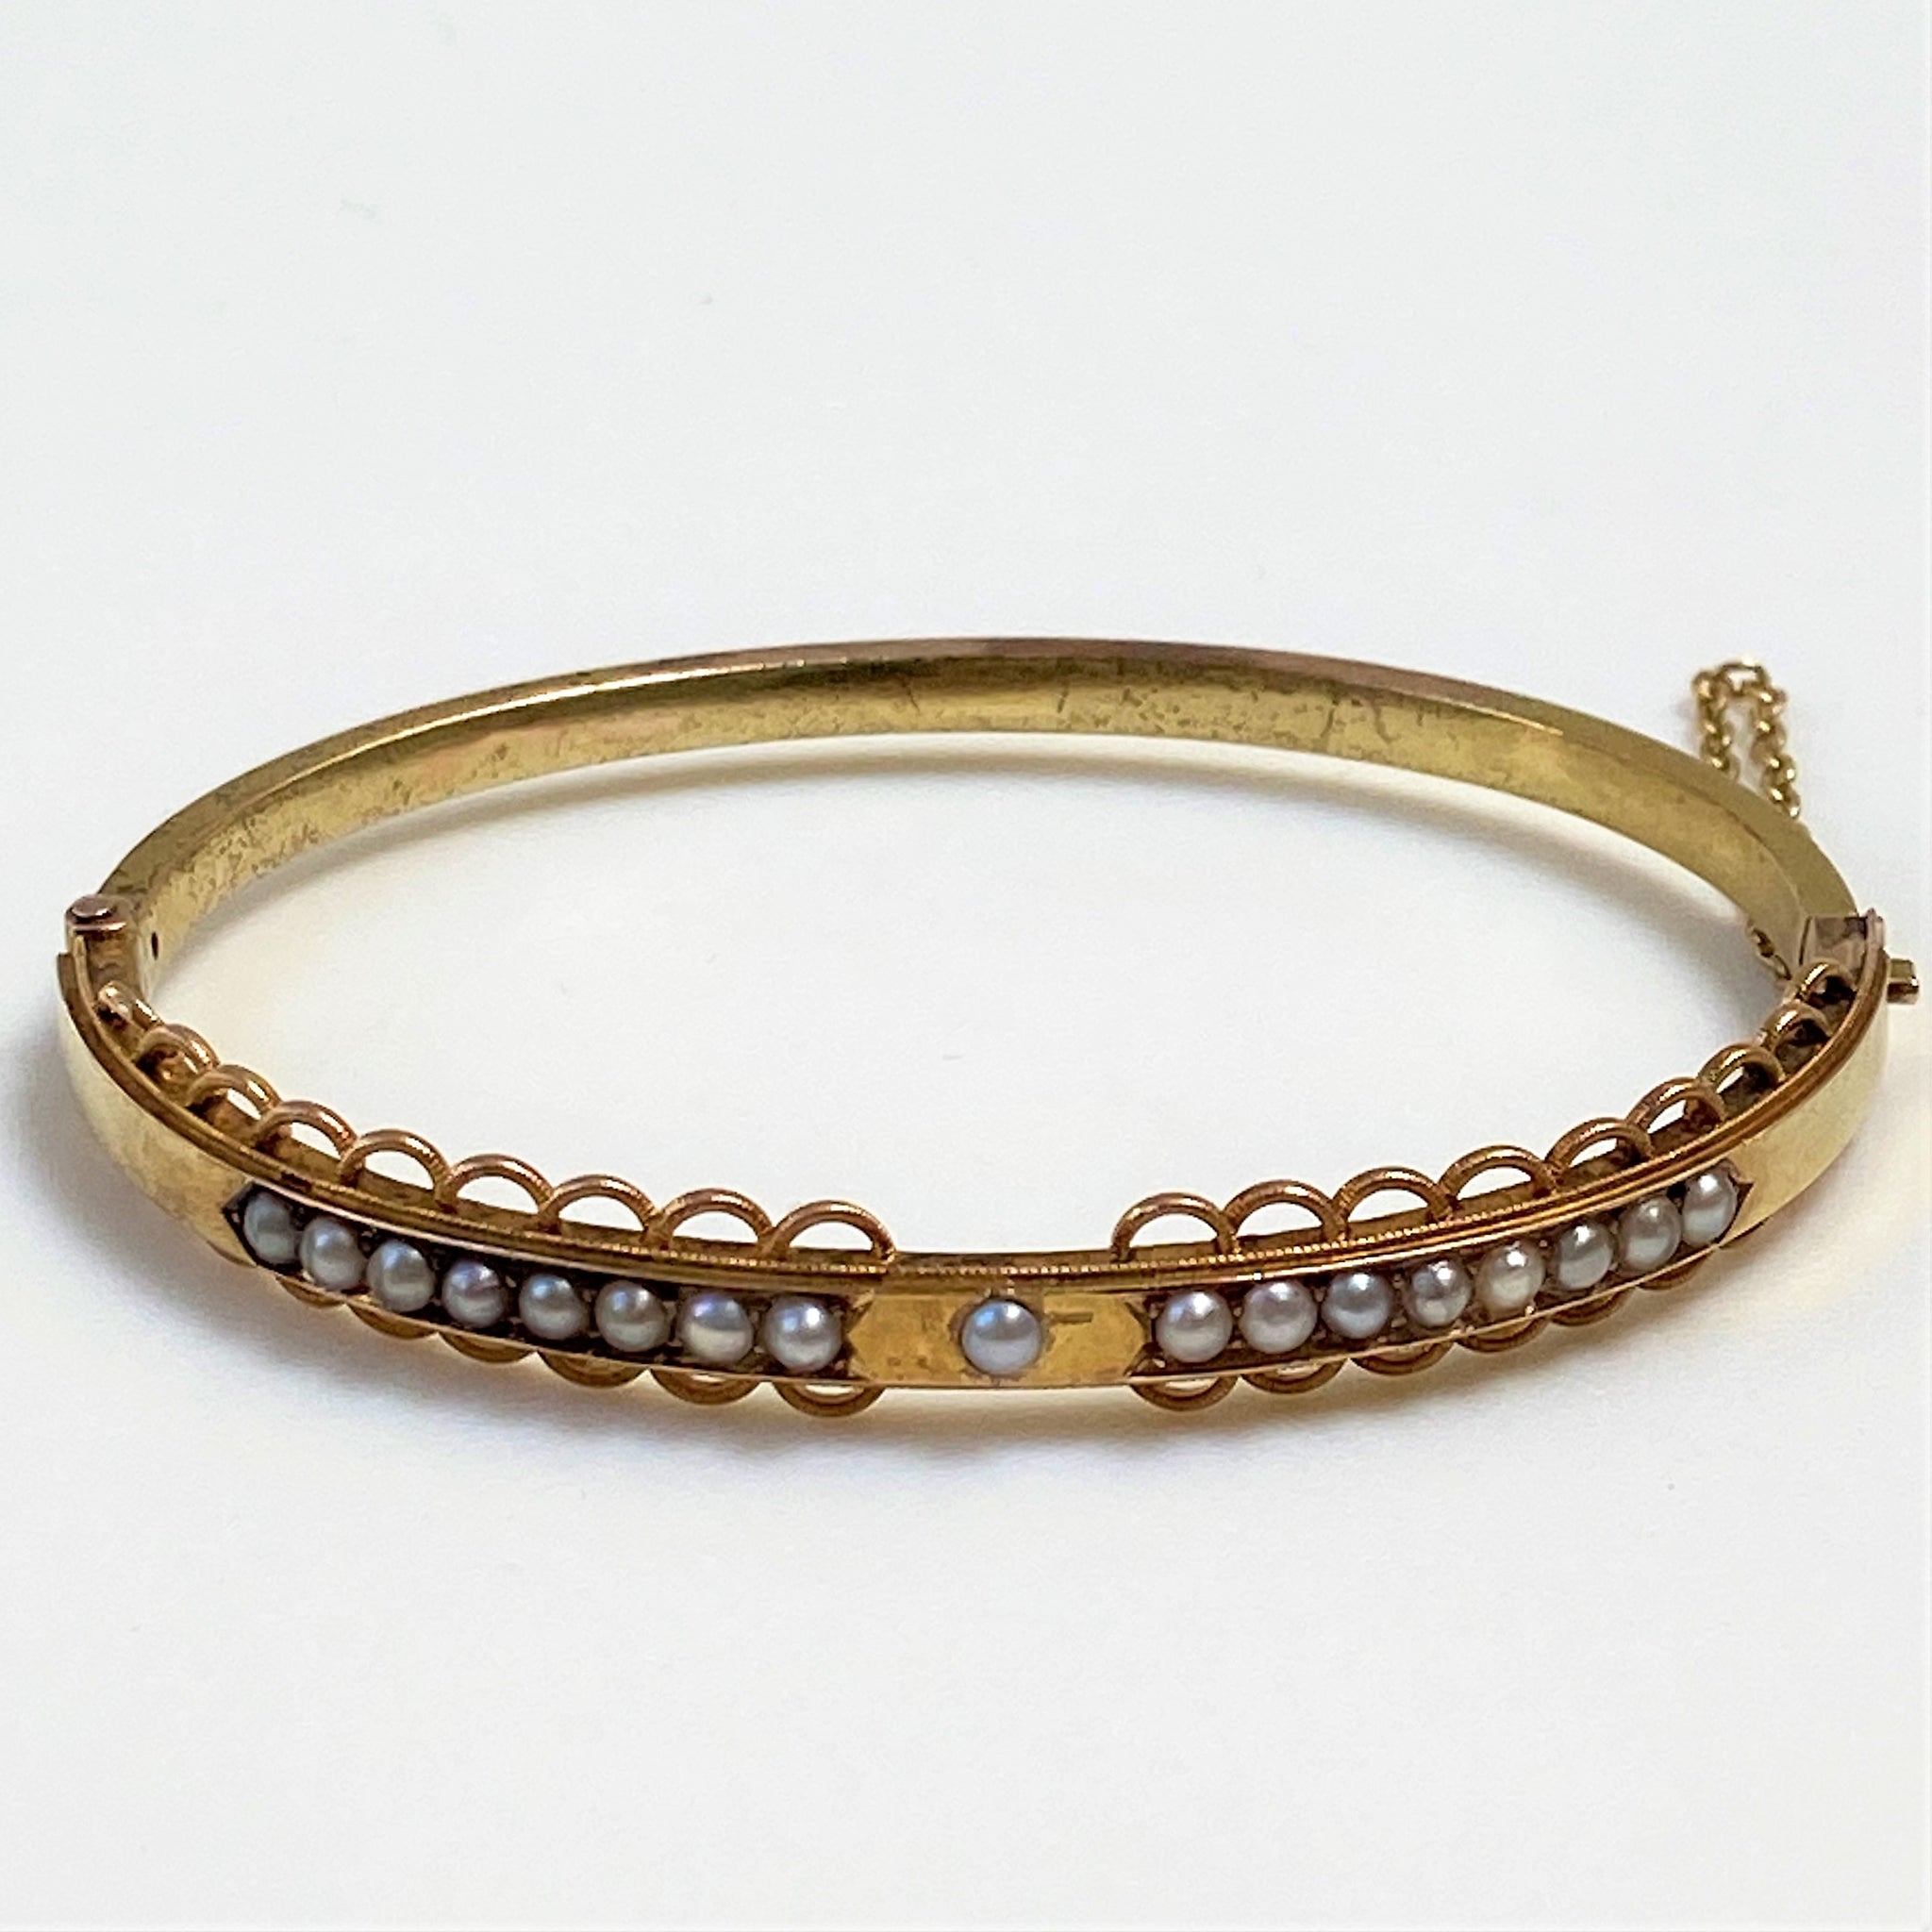 Antique 18ct Gold and Pearl Hinged Bangle Bracelet